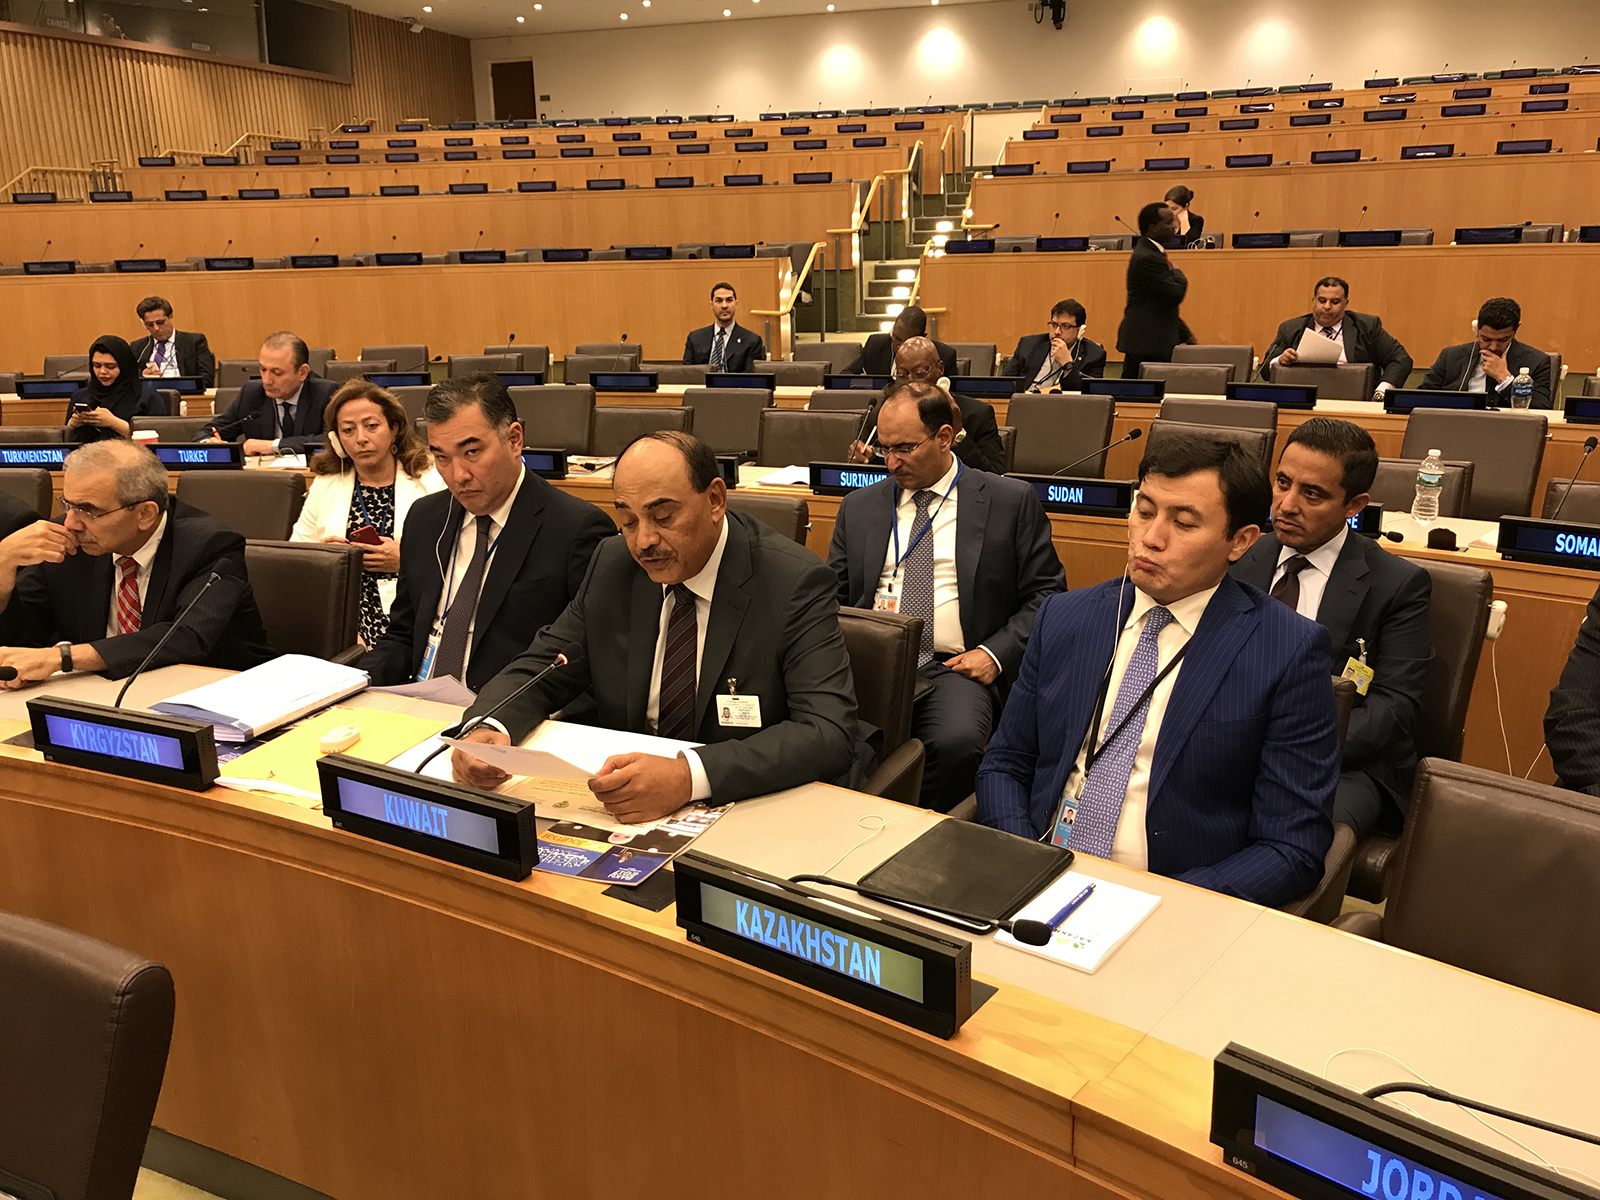 First Deputy Premier and Foreign Minister Sheikh Sabah Al-Khaled Al-Hamad Al-Sabah participates in the Organization of Islamic Cooperation's (OIC) ministerial meeting in New York